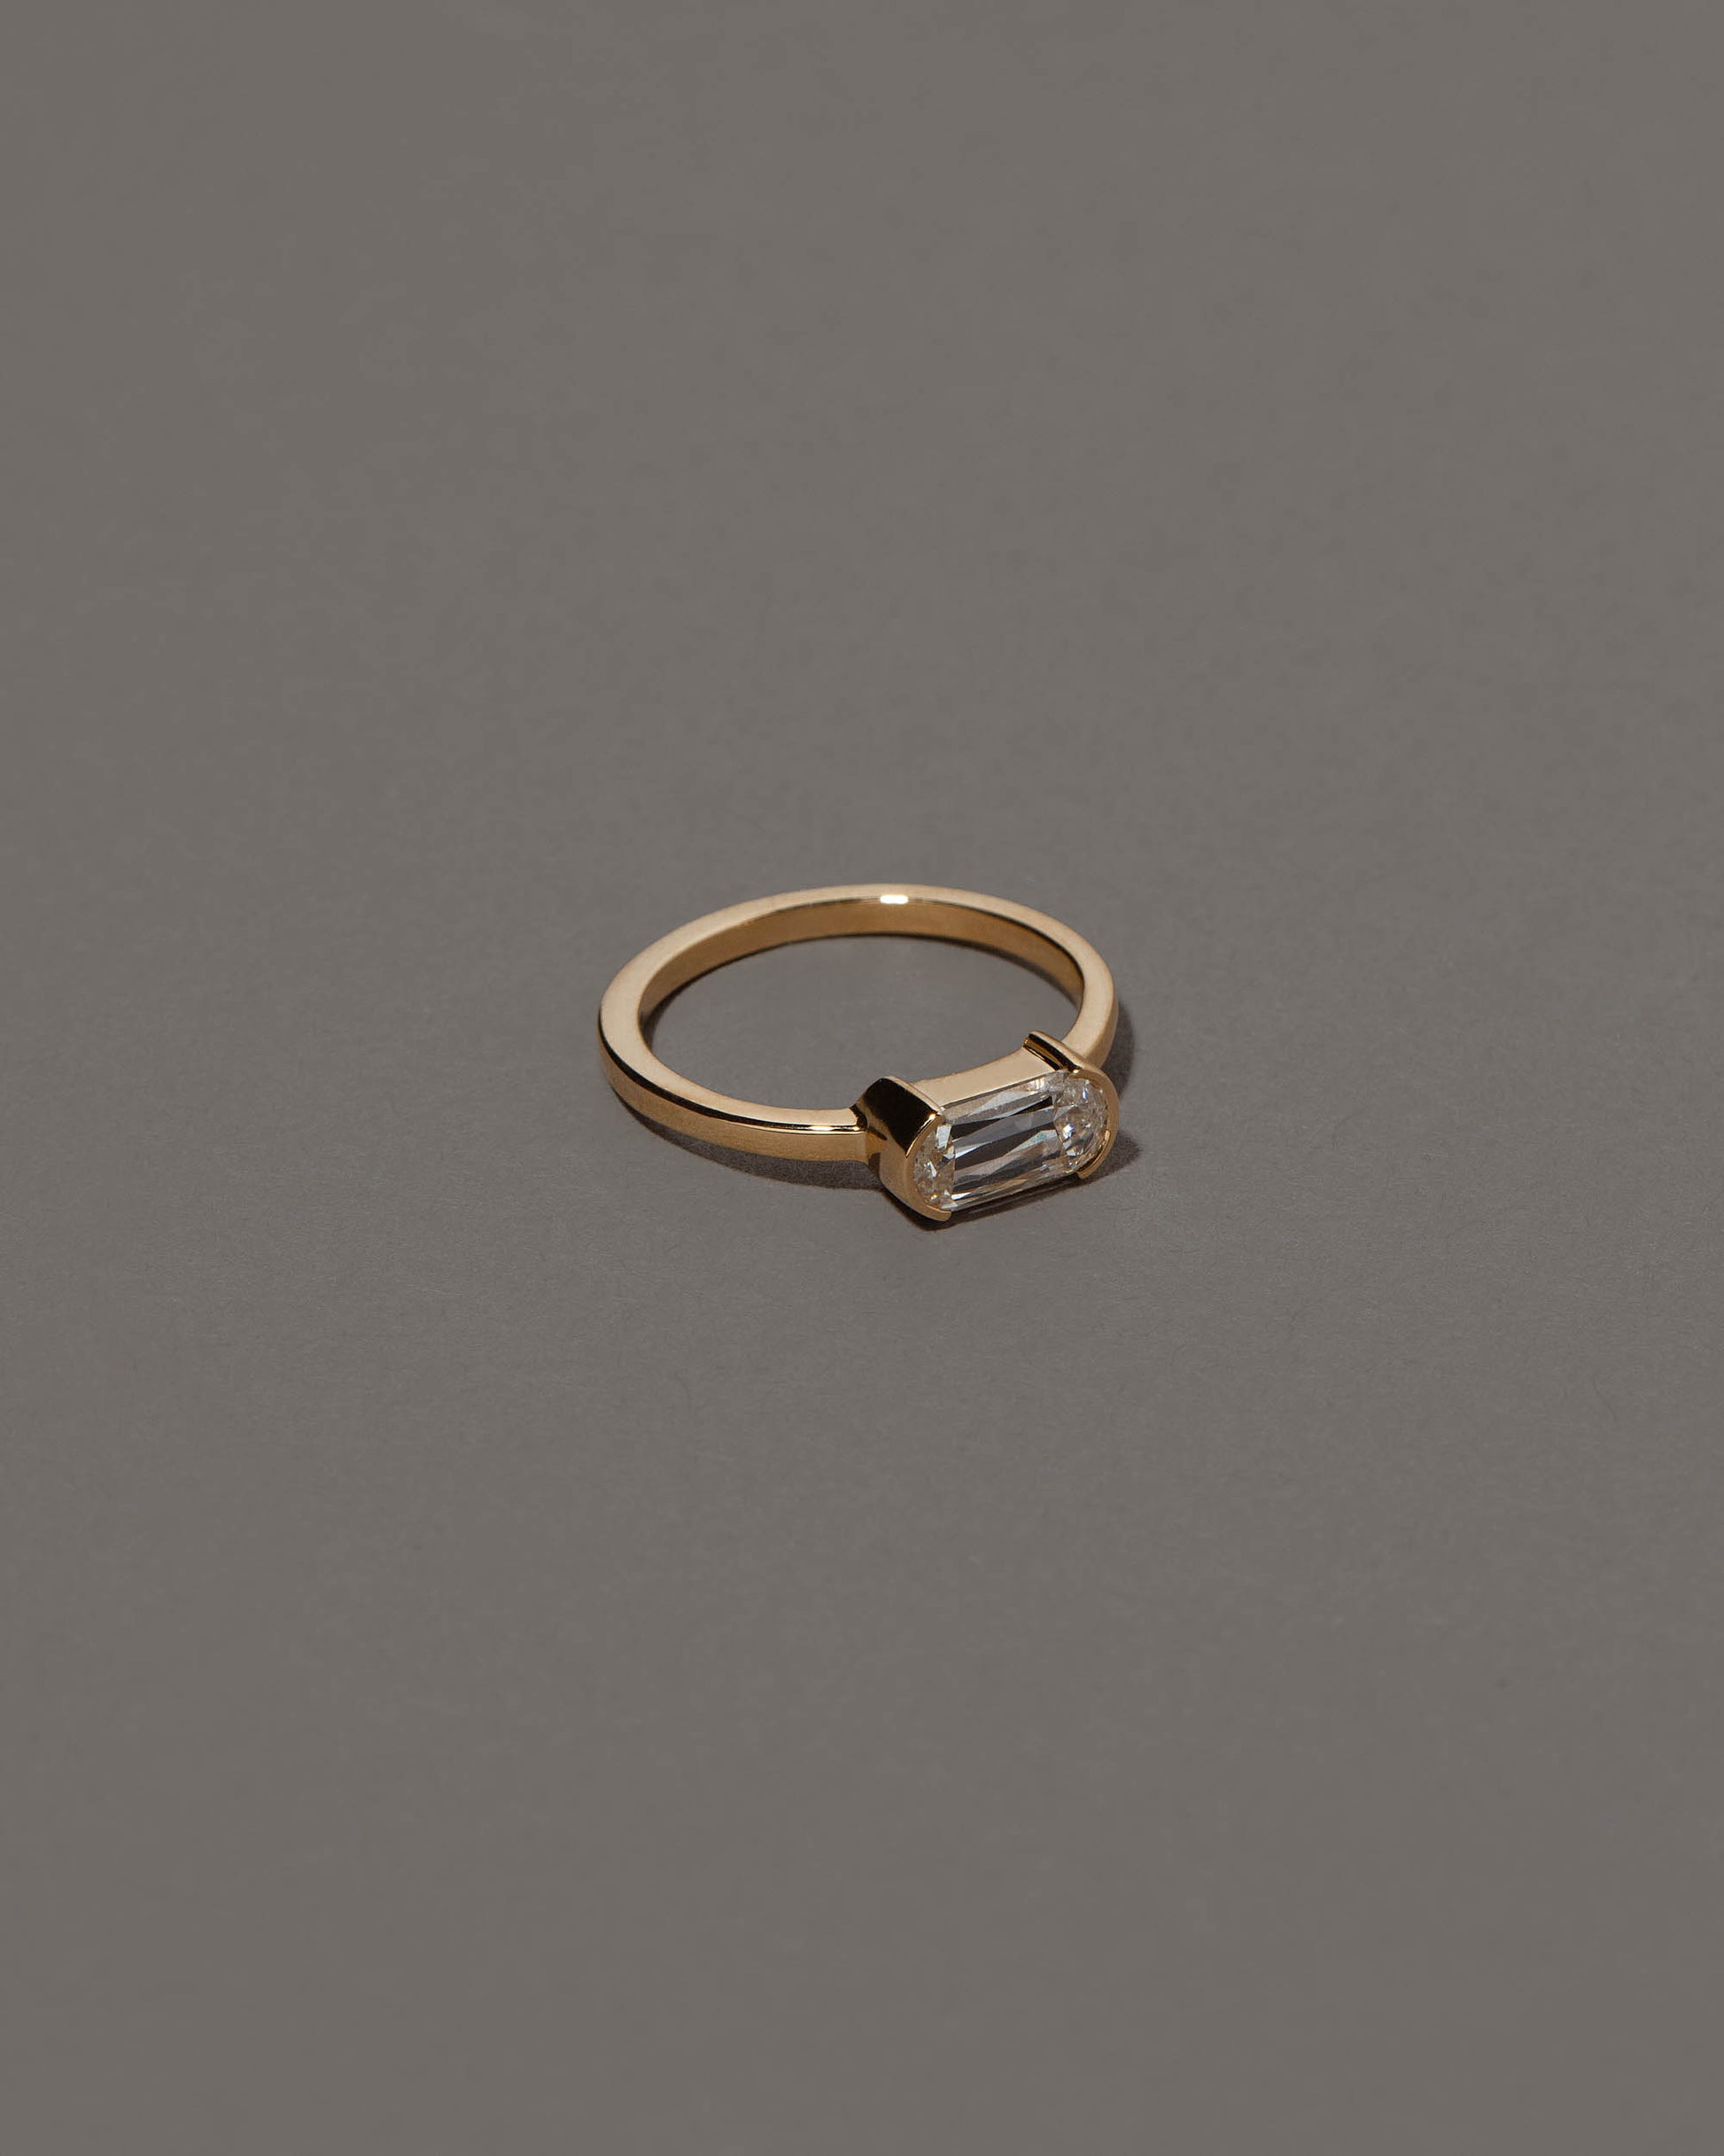 View from the side of the Conviviality Ring on grey color background.